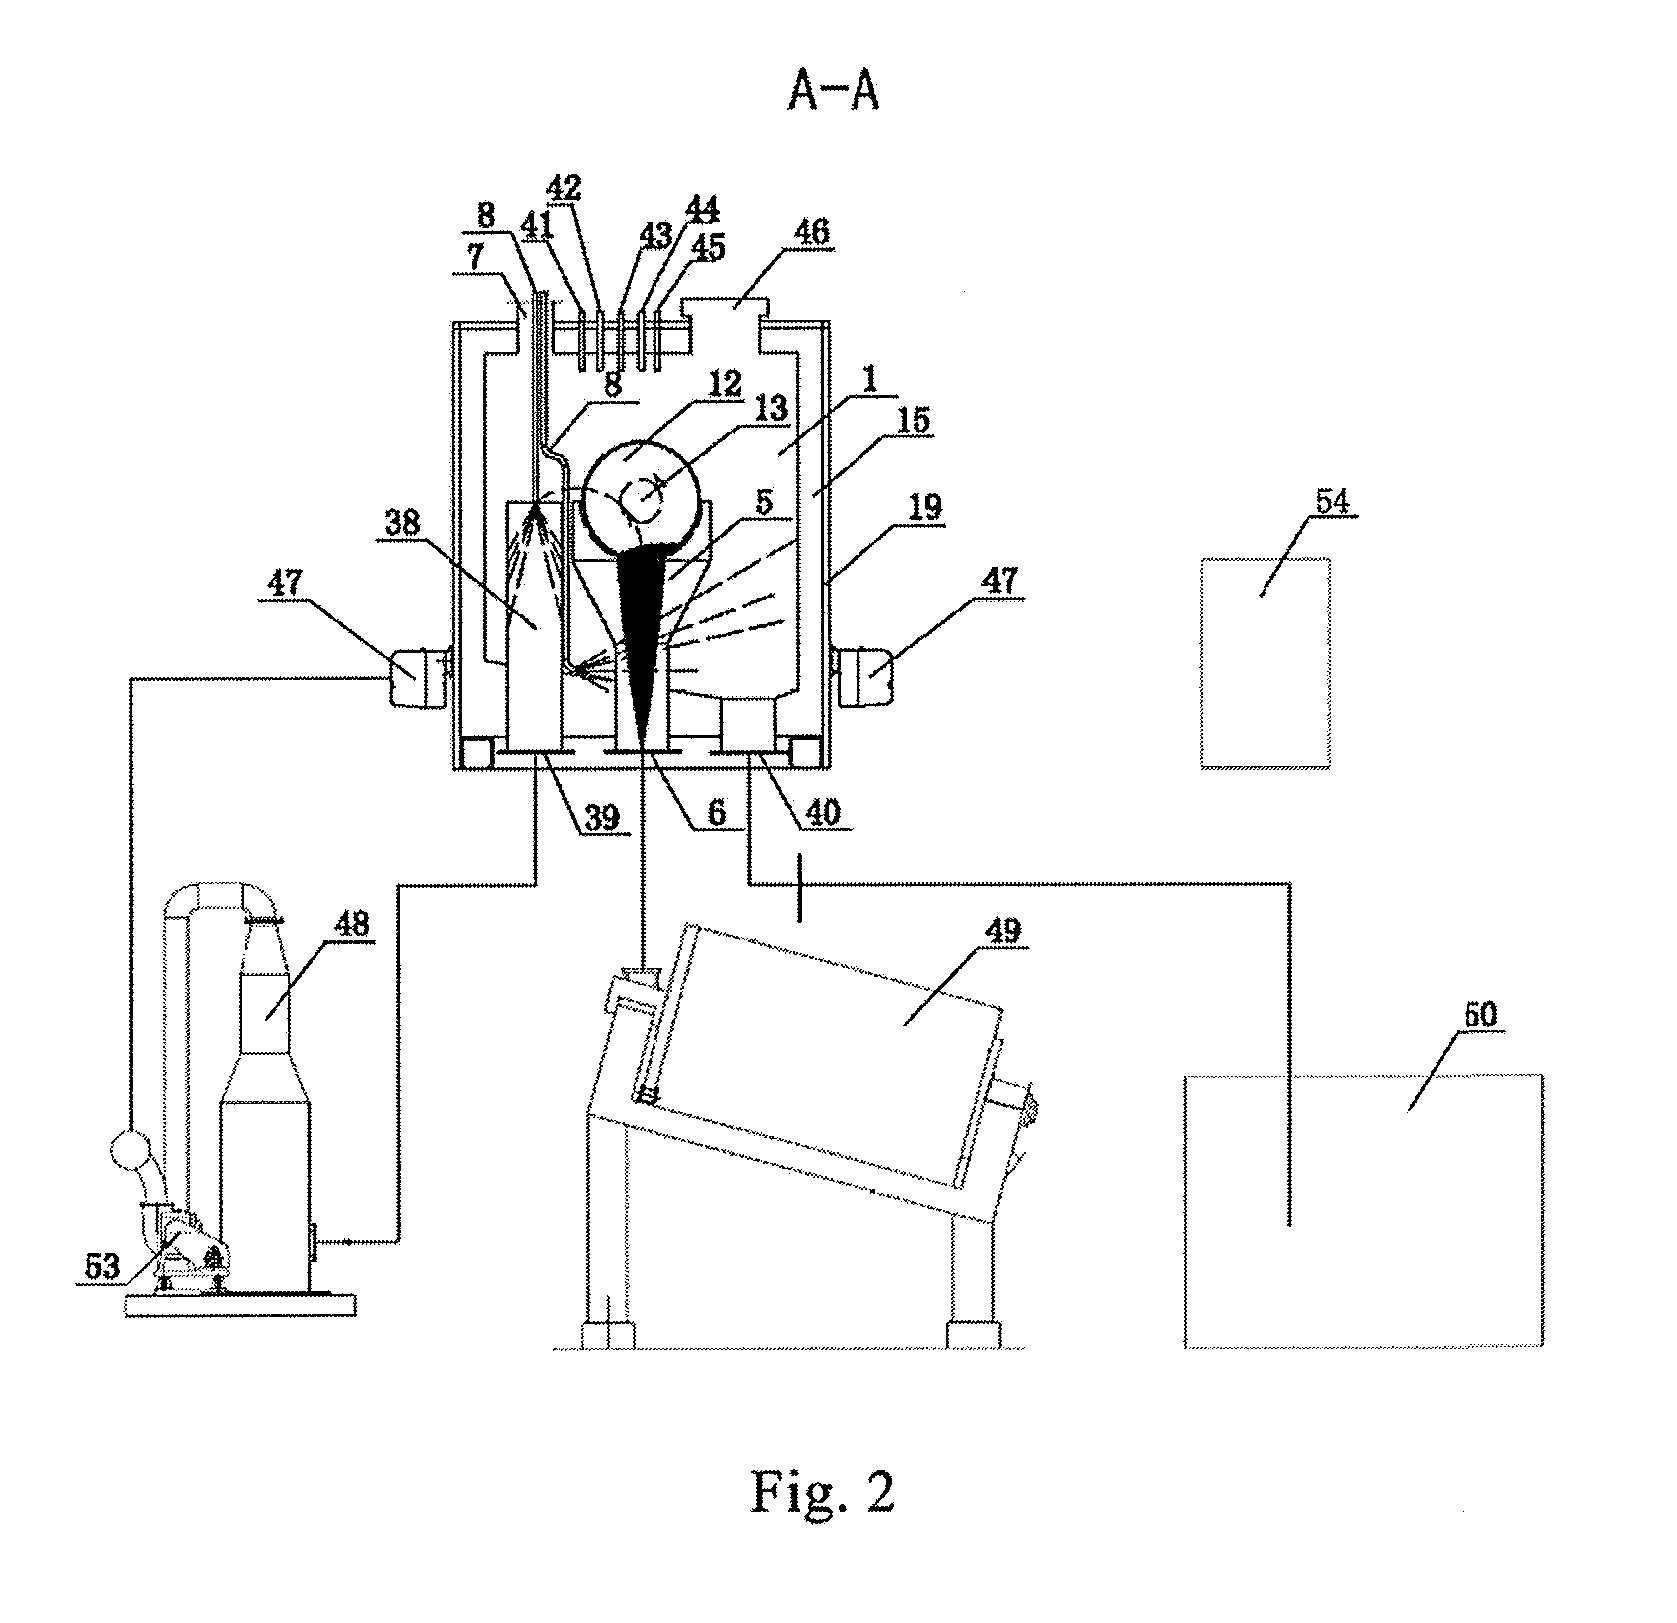 Method and device for anaerobic pyrolysis treatment of dead-of-disease livestock and municipal organic refuse